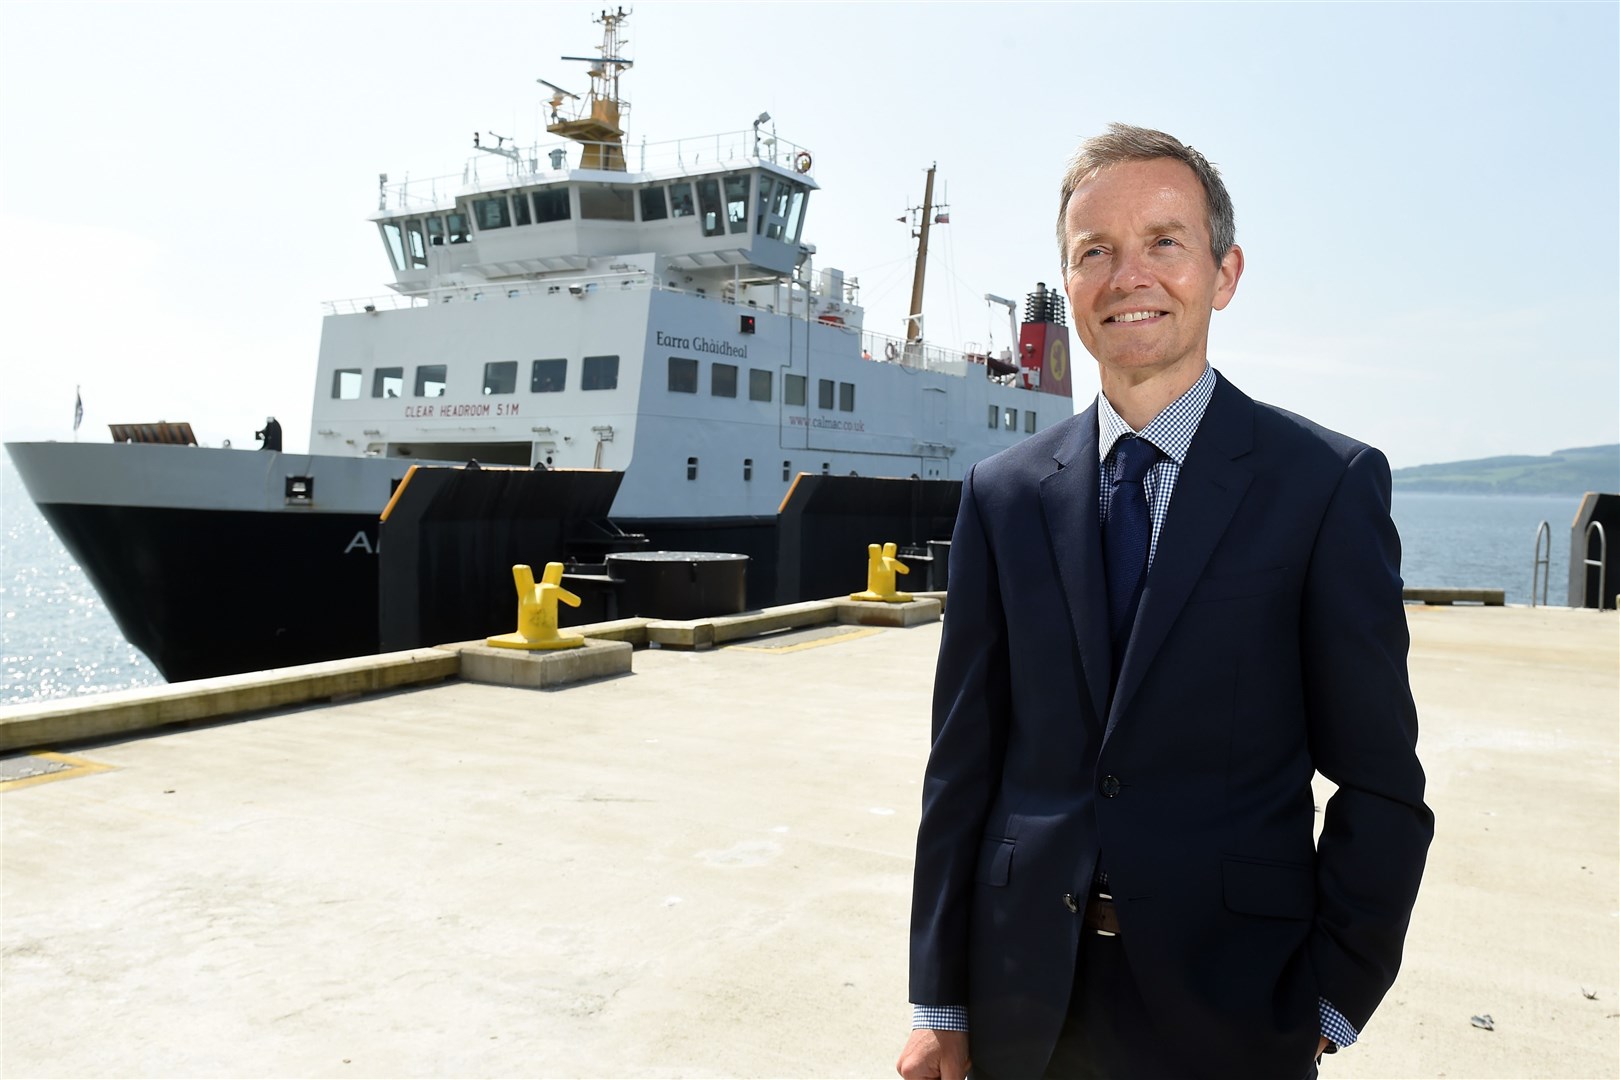 CalMac managing director Robbie Drummond: 'Postponing the launch from April 25 will allow us to prioritise these urgent issues and focus on implementing our vessel recovery plan to restore our full service, while reducing some of the pressure staff and customers are currently facing.'